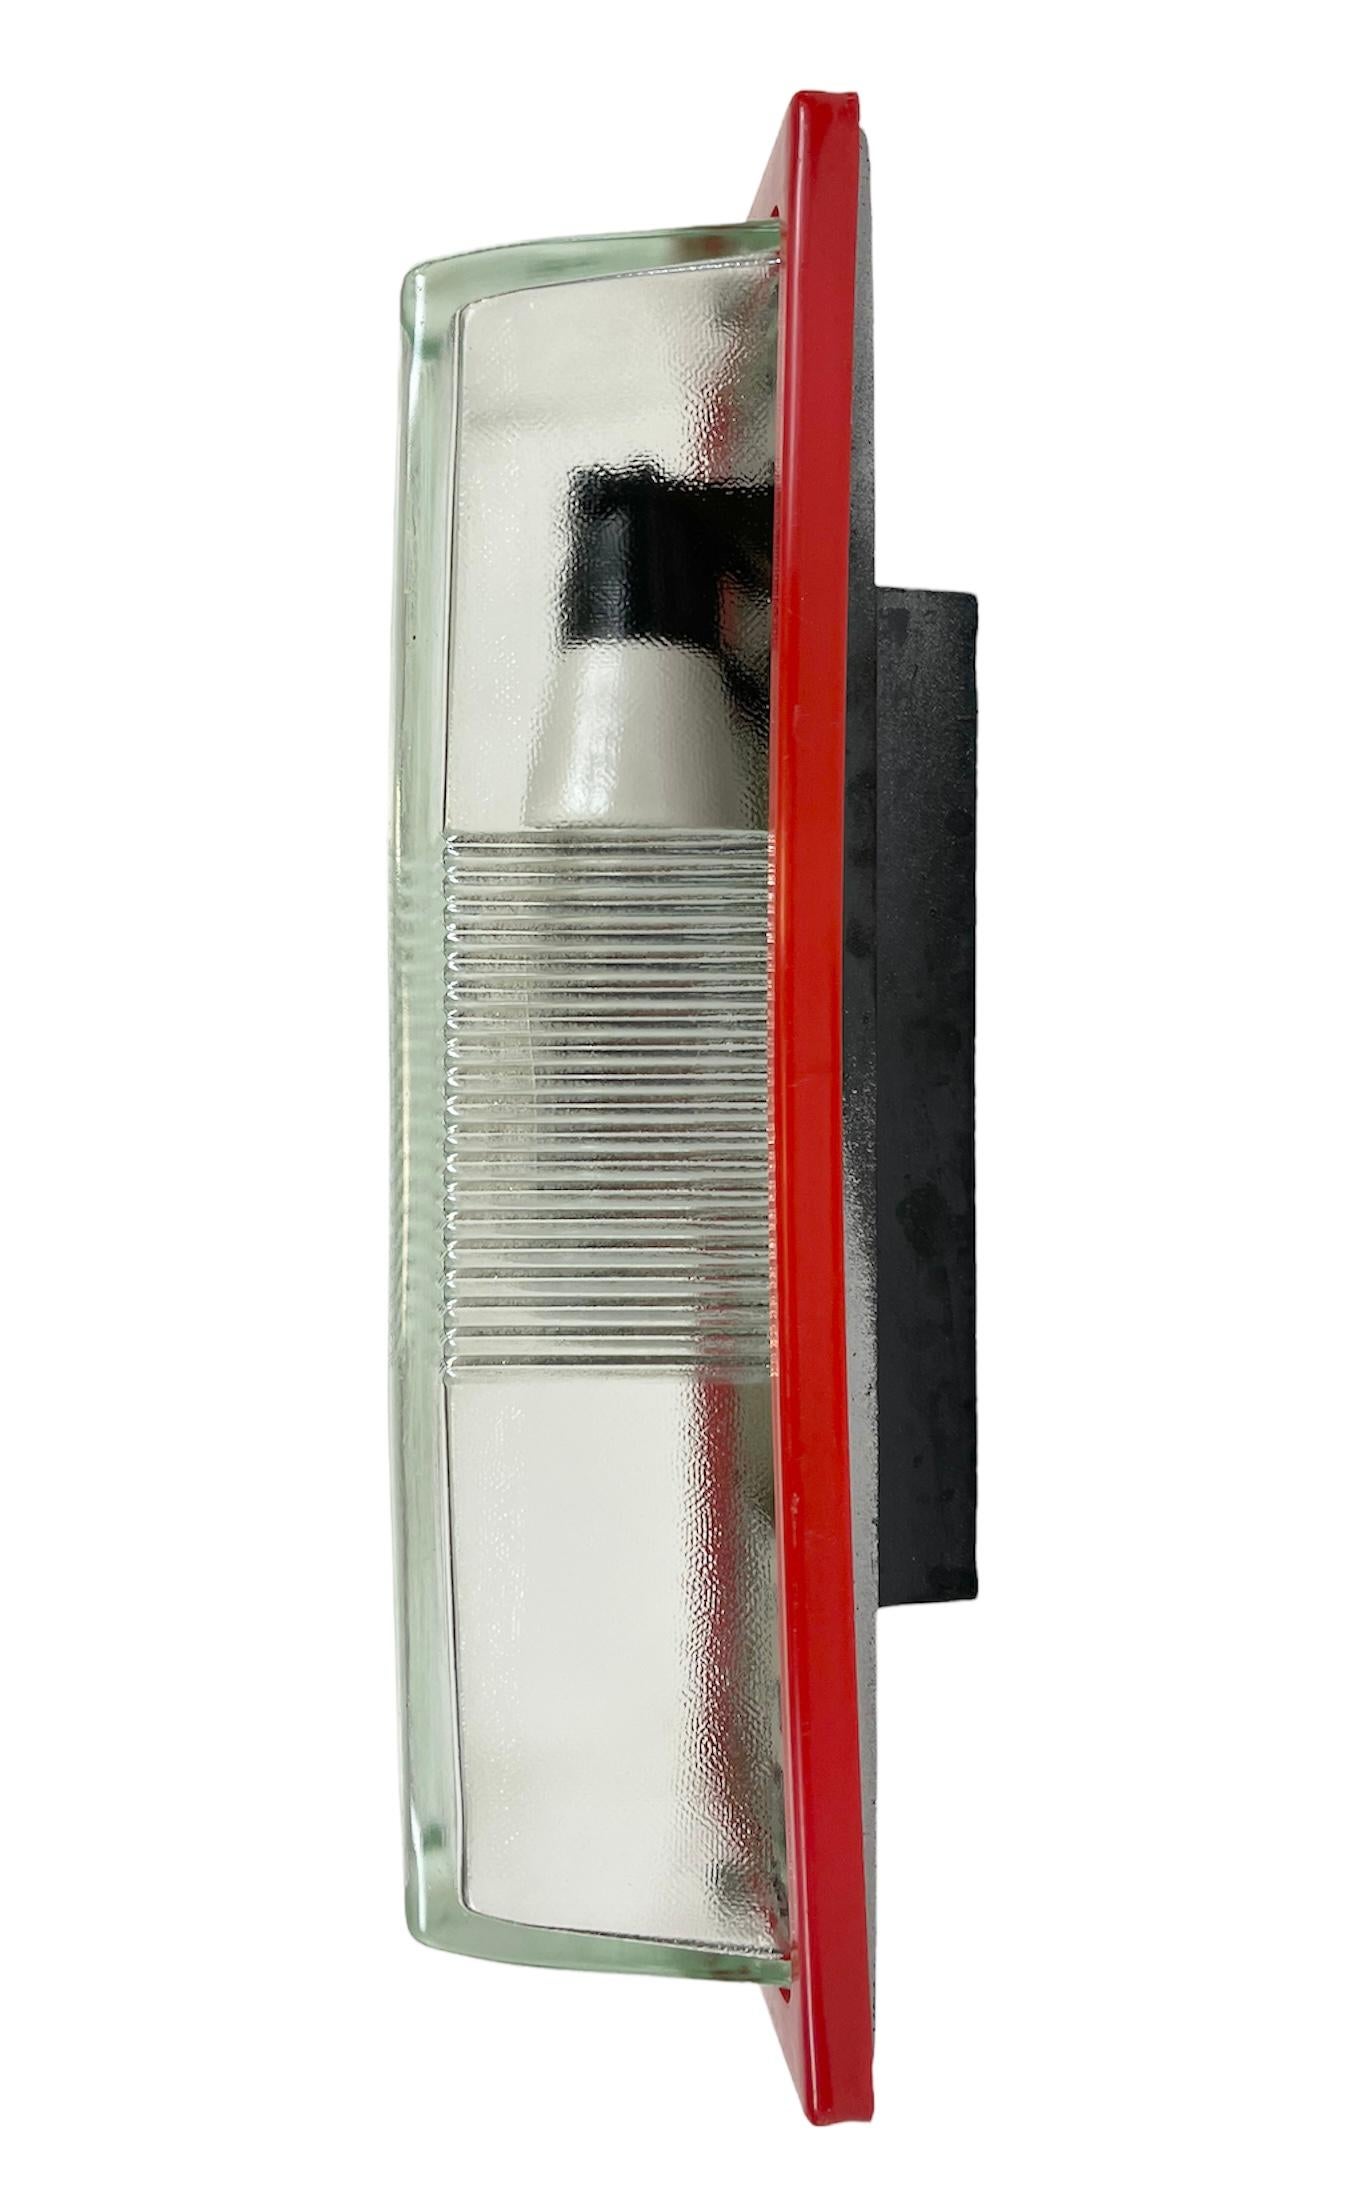 Vintage Industrial wall light made by Elektrosvit in former Czechoslovakia during the 1970s. It features a bakelite body, a red bakelite frame and a glass cover. The porcelain socket requires E 27 light bulbs. New wire. The weight of the light is 2